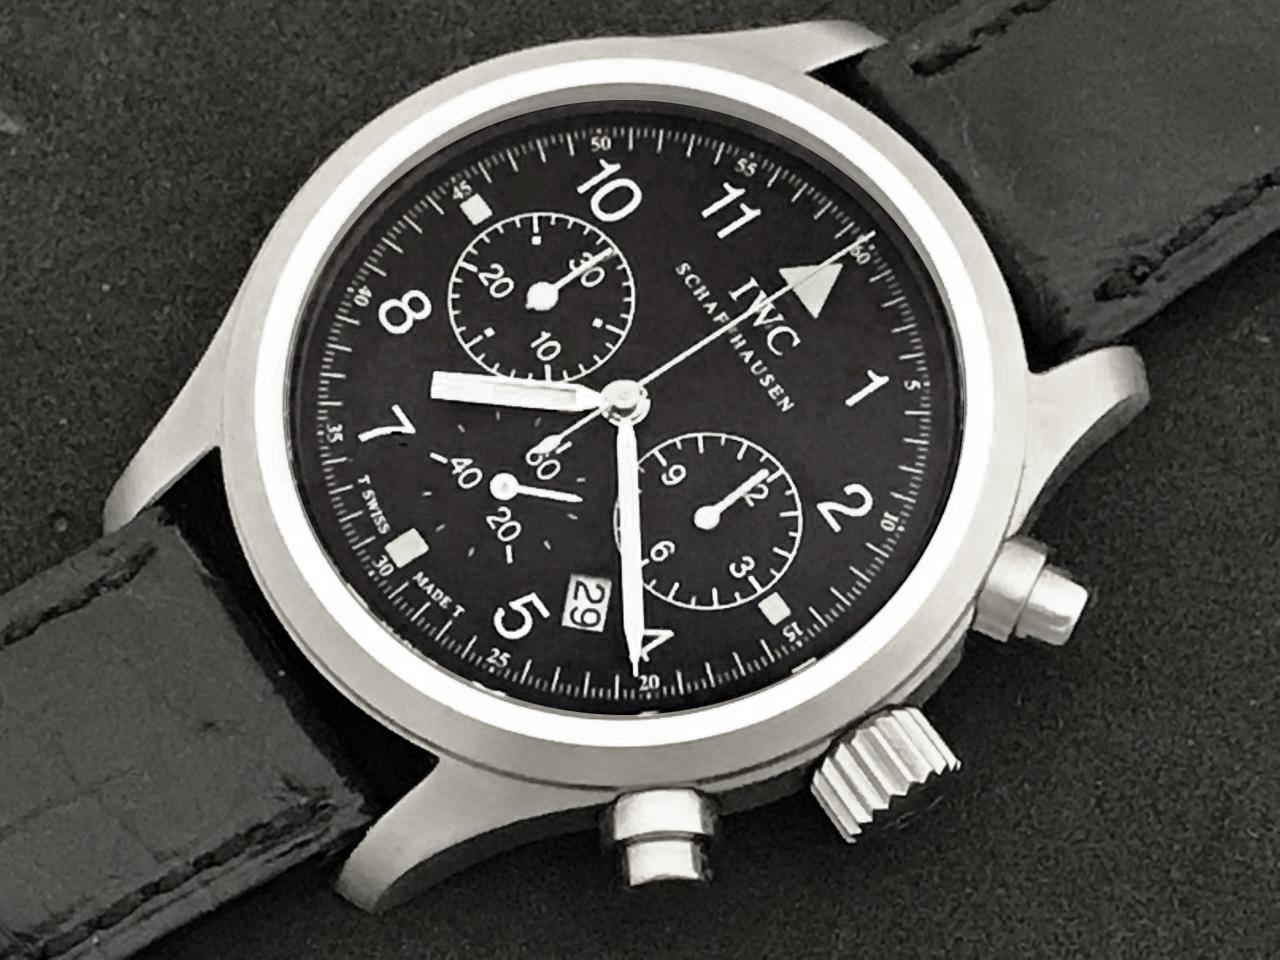 The IWC Der Flieger Classic Pilot Chronograph, certified pre-owned contemporary men's quartz with date wrist watch.  Rich black dial with white luminous arabic numbers. Stainless Steel round waterproof style case (36mm dia.) Black alligator strap